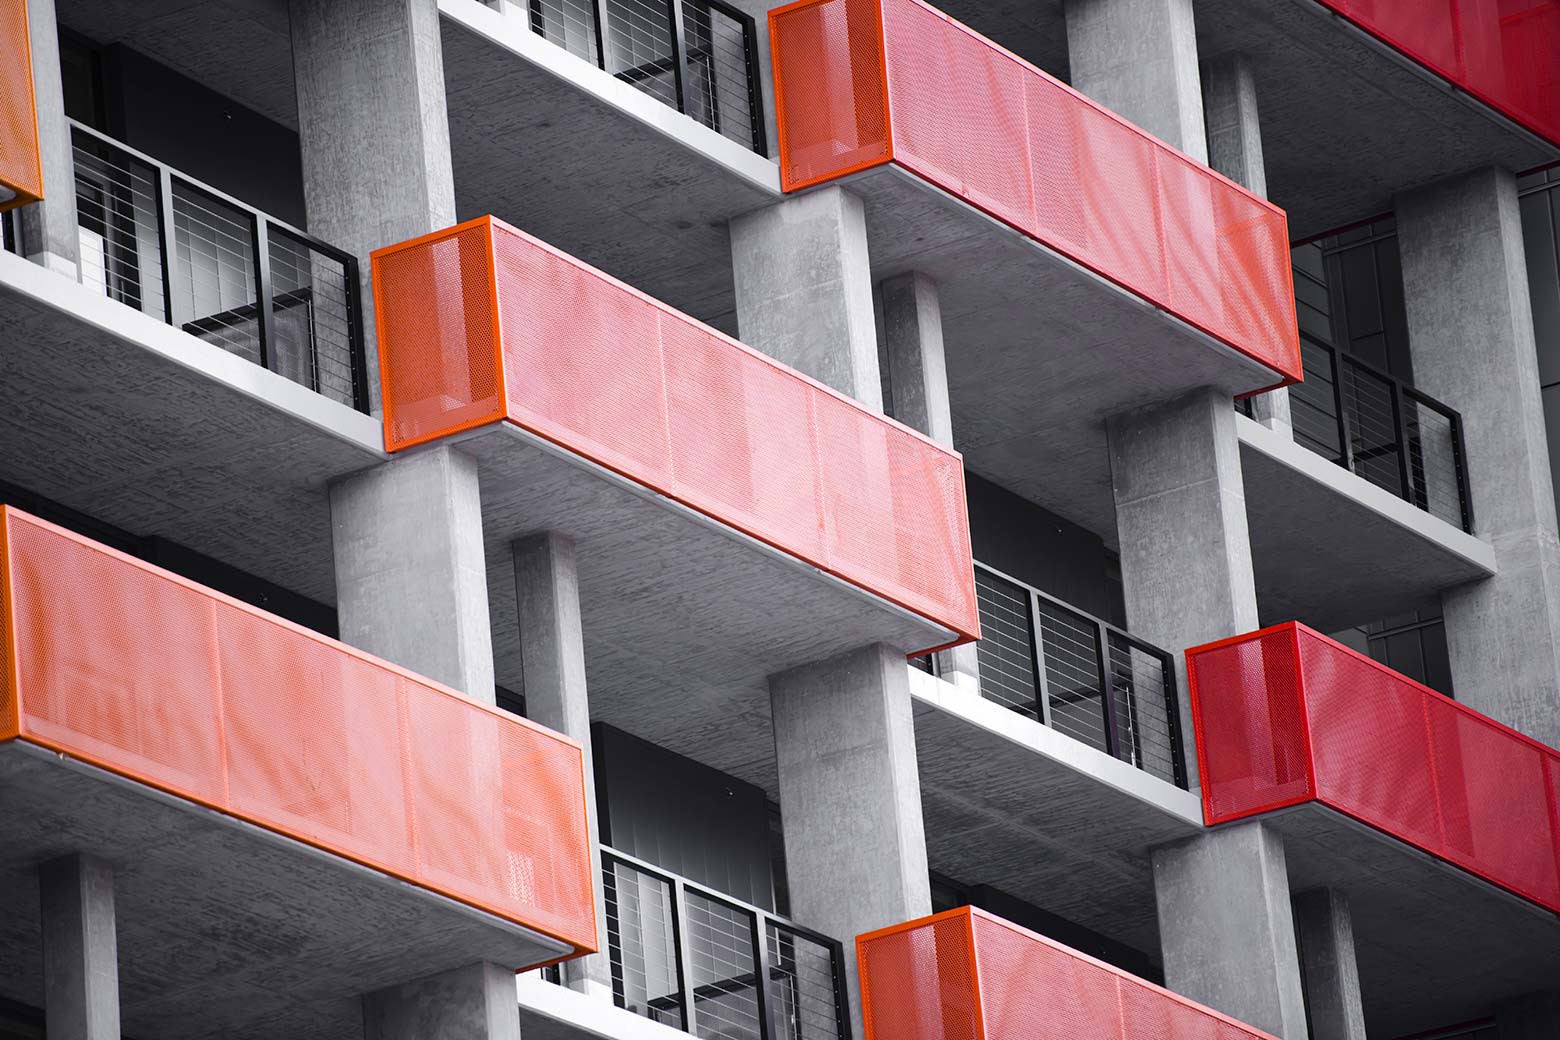 Orange and red balconies on a modern concrete high-rise building.